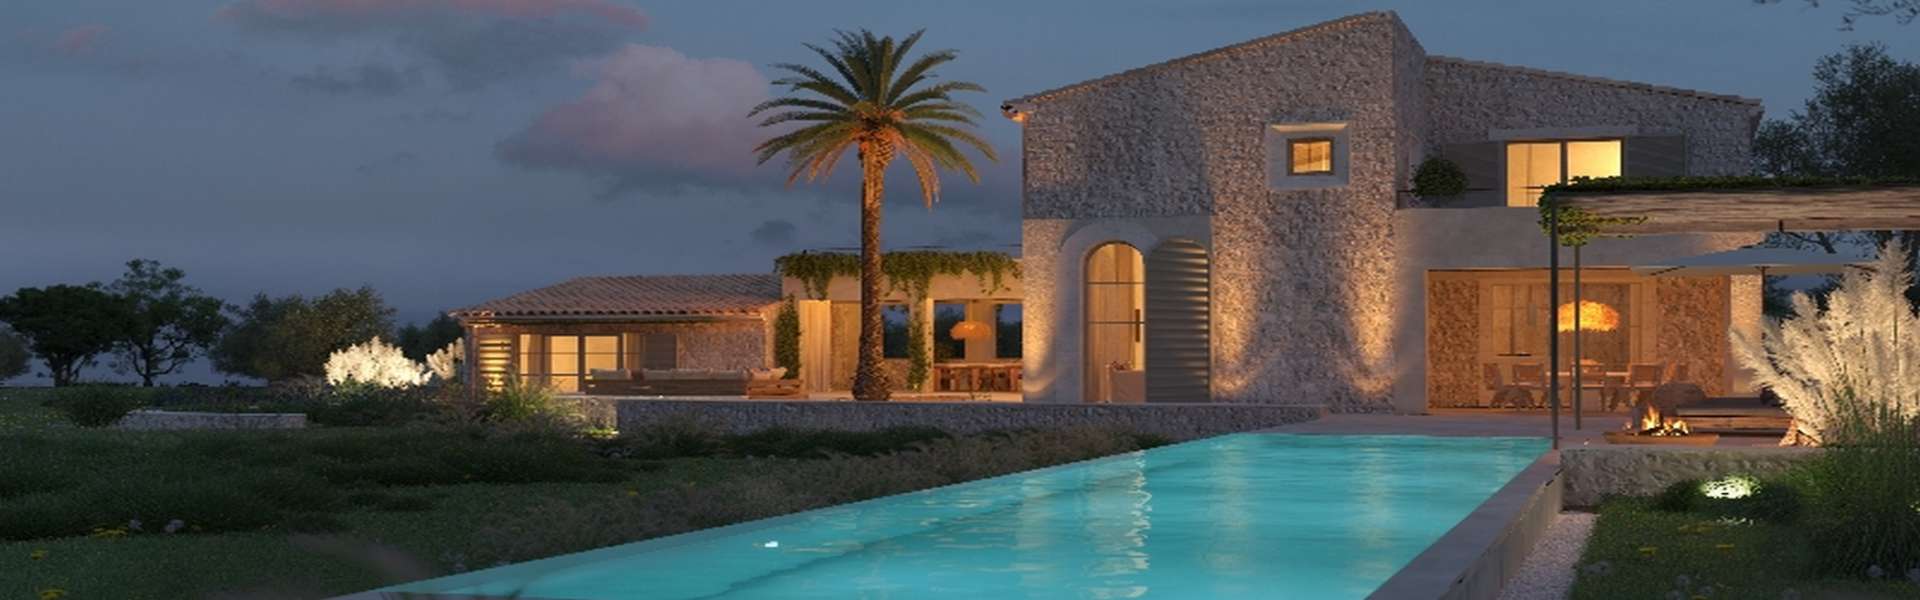 Newly built finca with Mallorcan charm and modern design in Santanyí